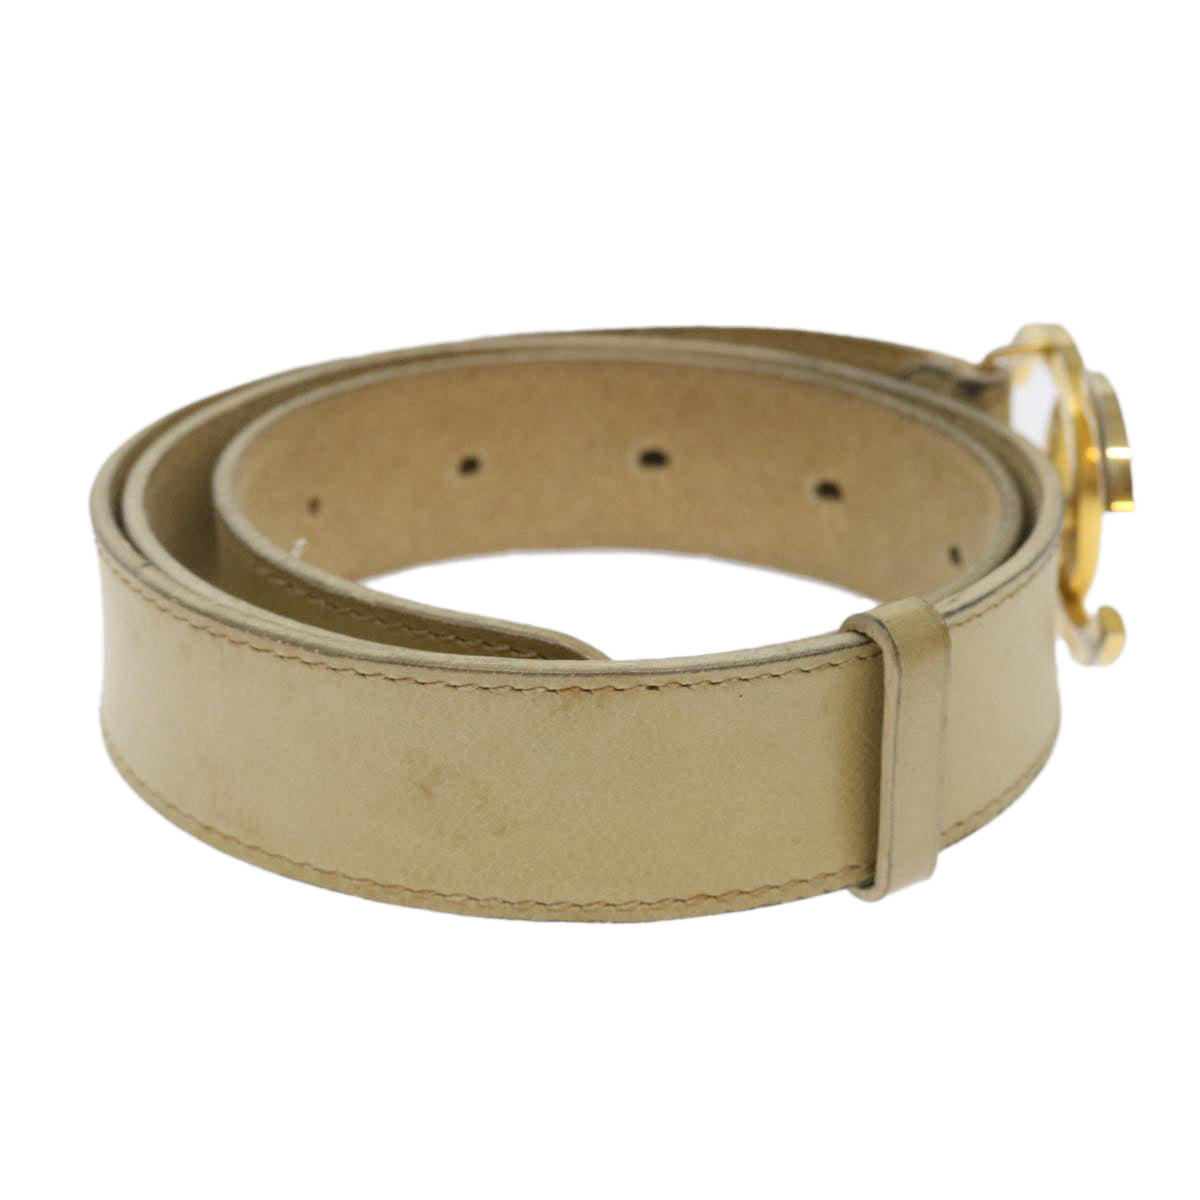 CHANEL COCO Mark Belt Leather 33.1"" Beige CC Auth am4714 - 0